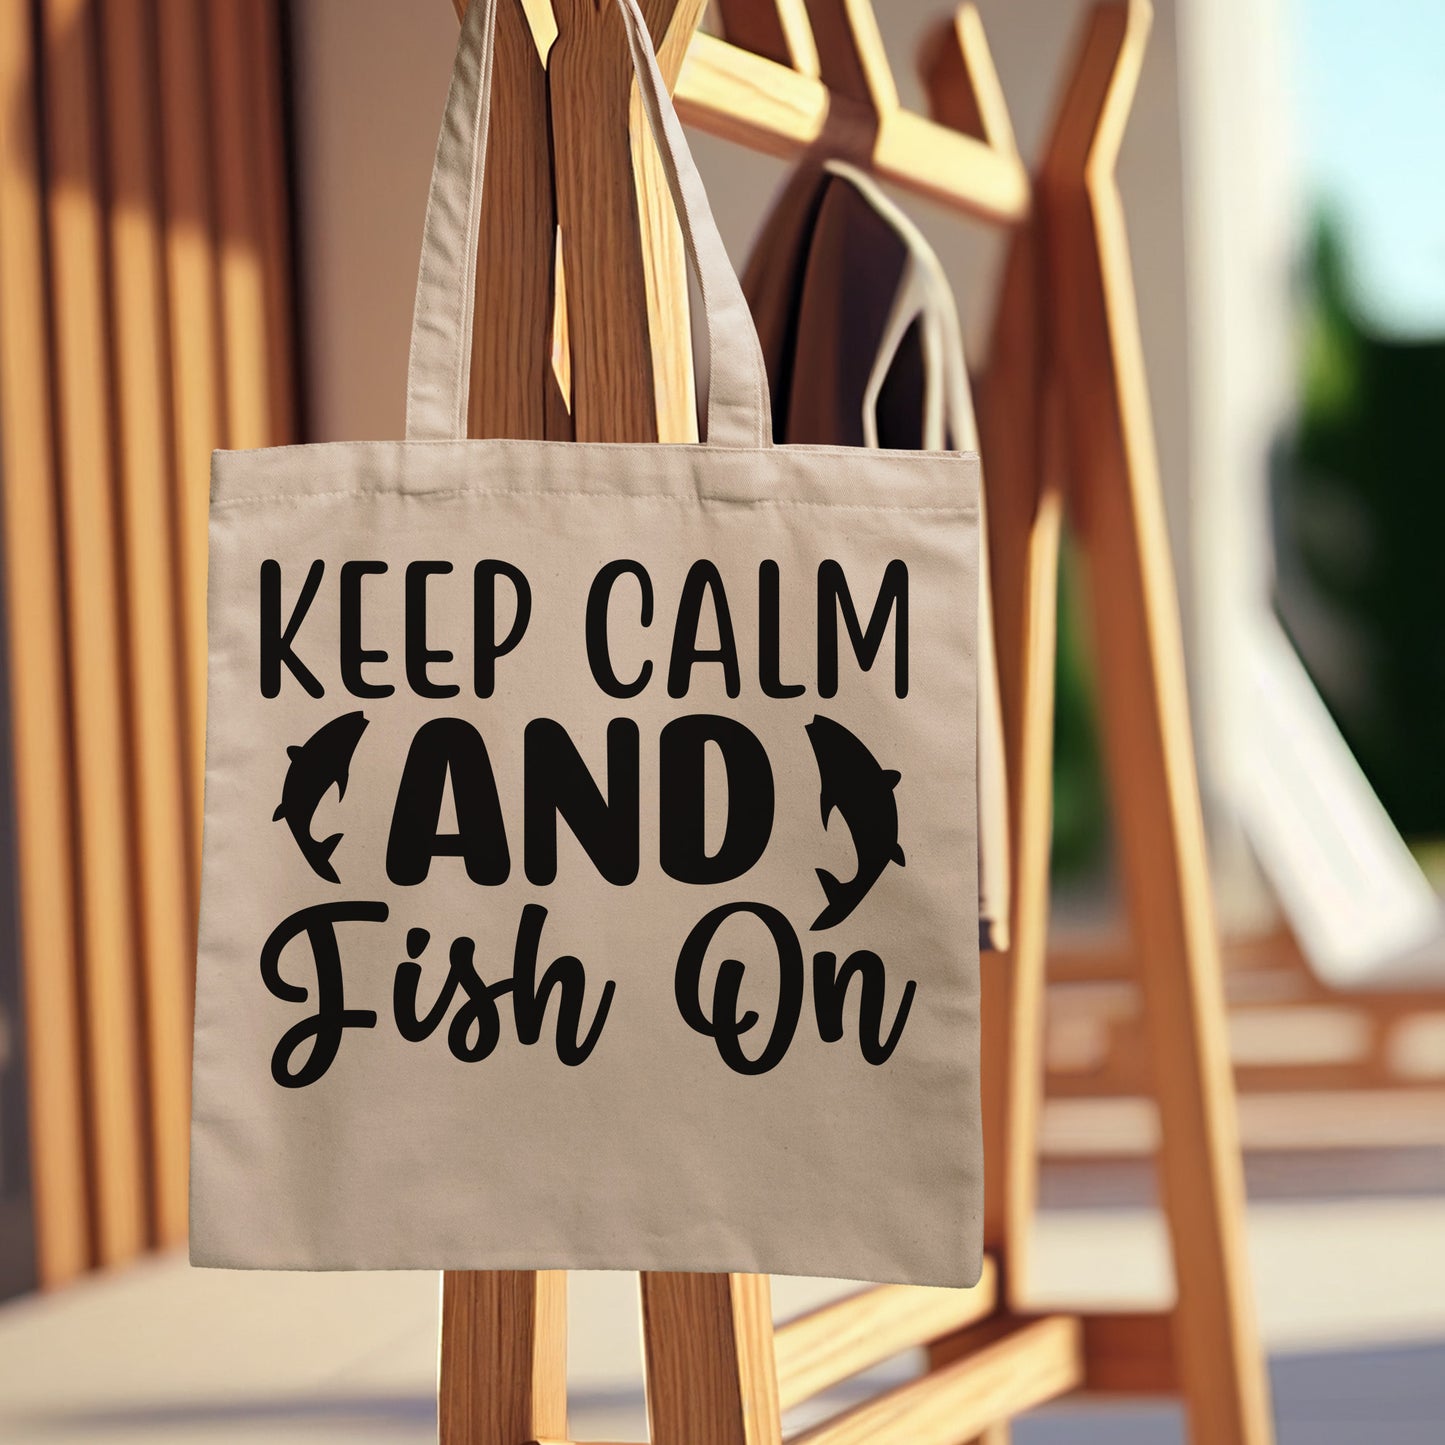 "Keep Calm and Fish On" With Two Fish Graphic